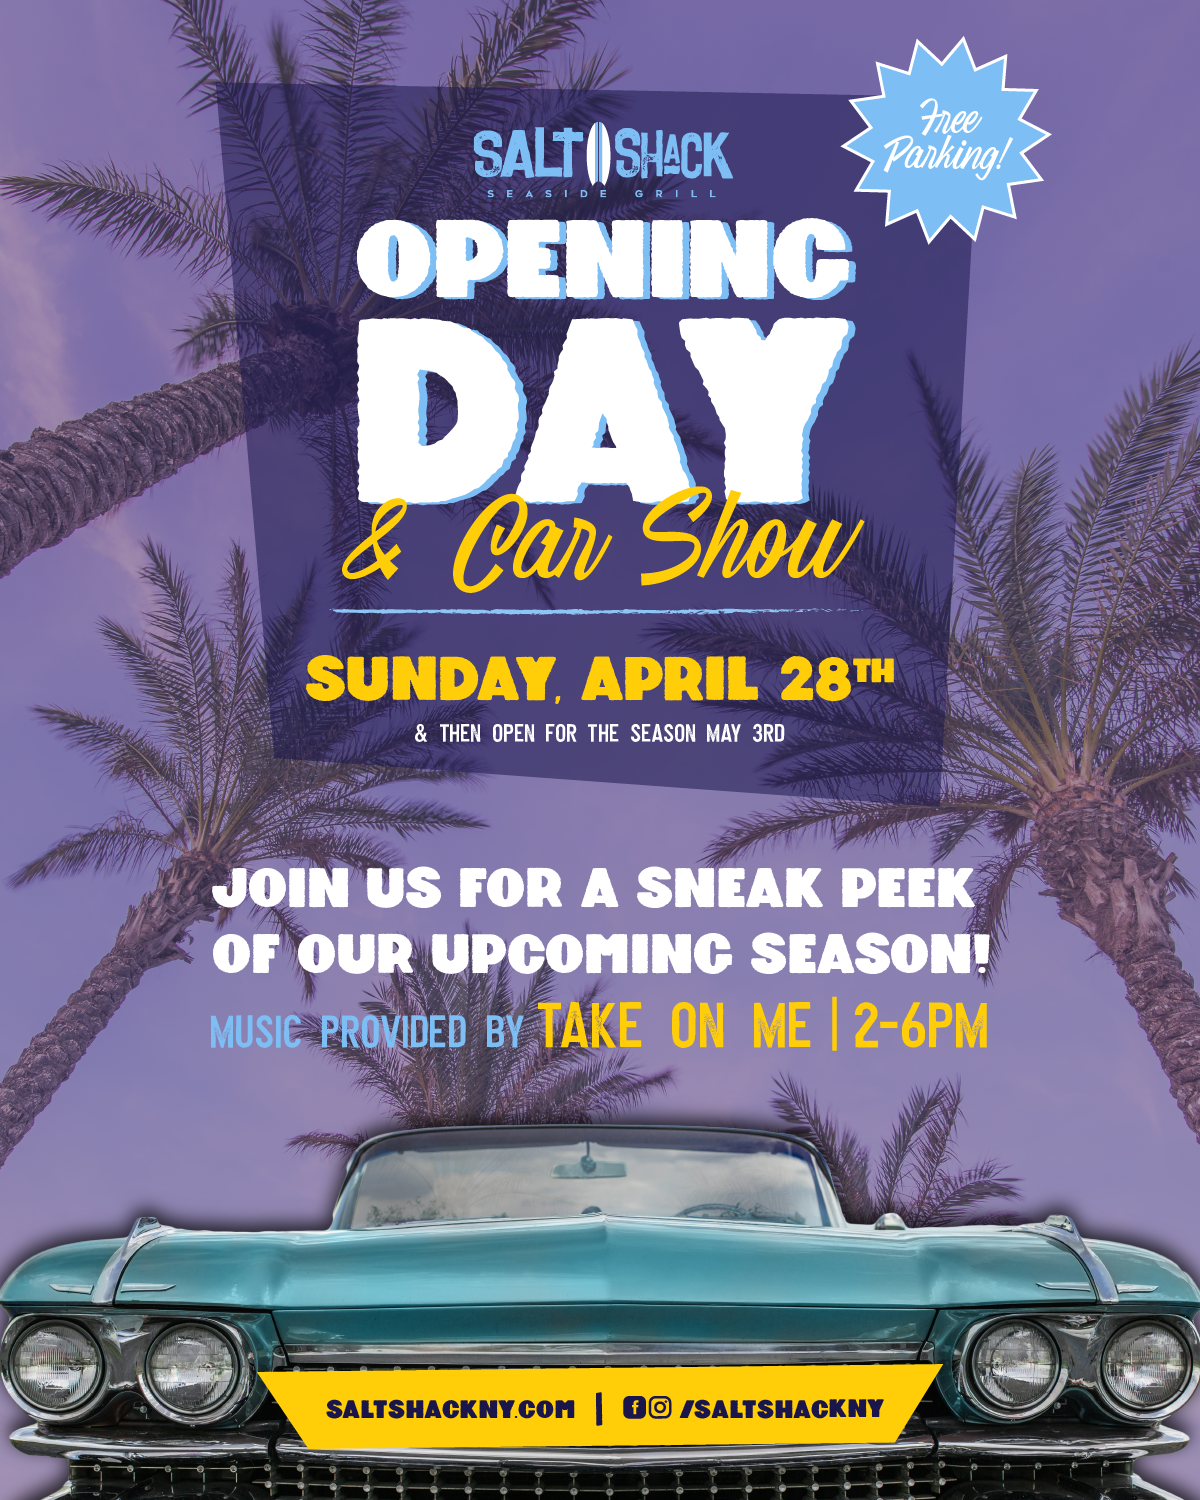 Sunday, April 28th 12 pm: Join us for the Cedar Beach Car Show, live music by take on me at 2 pm